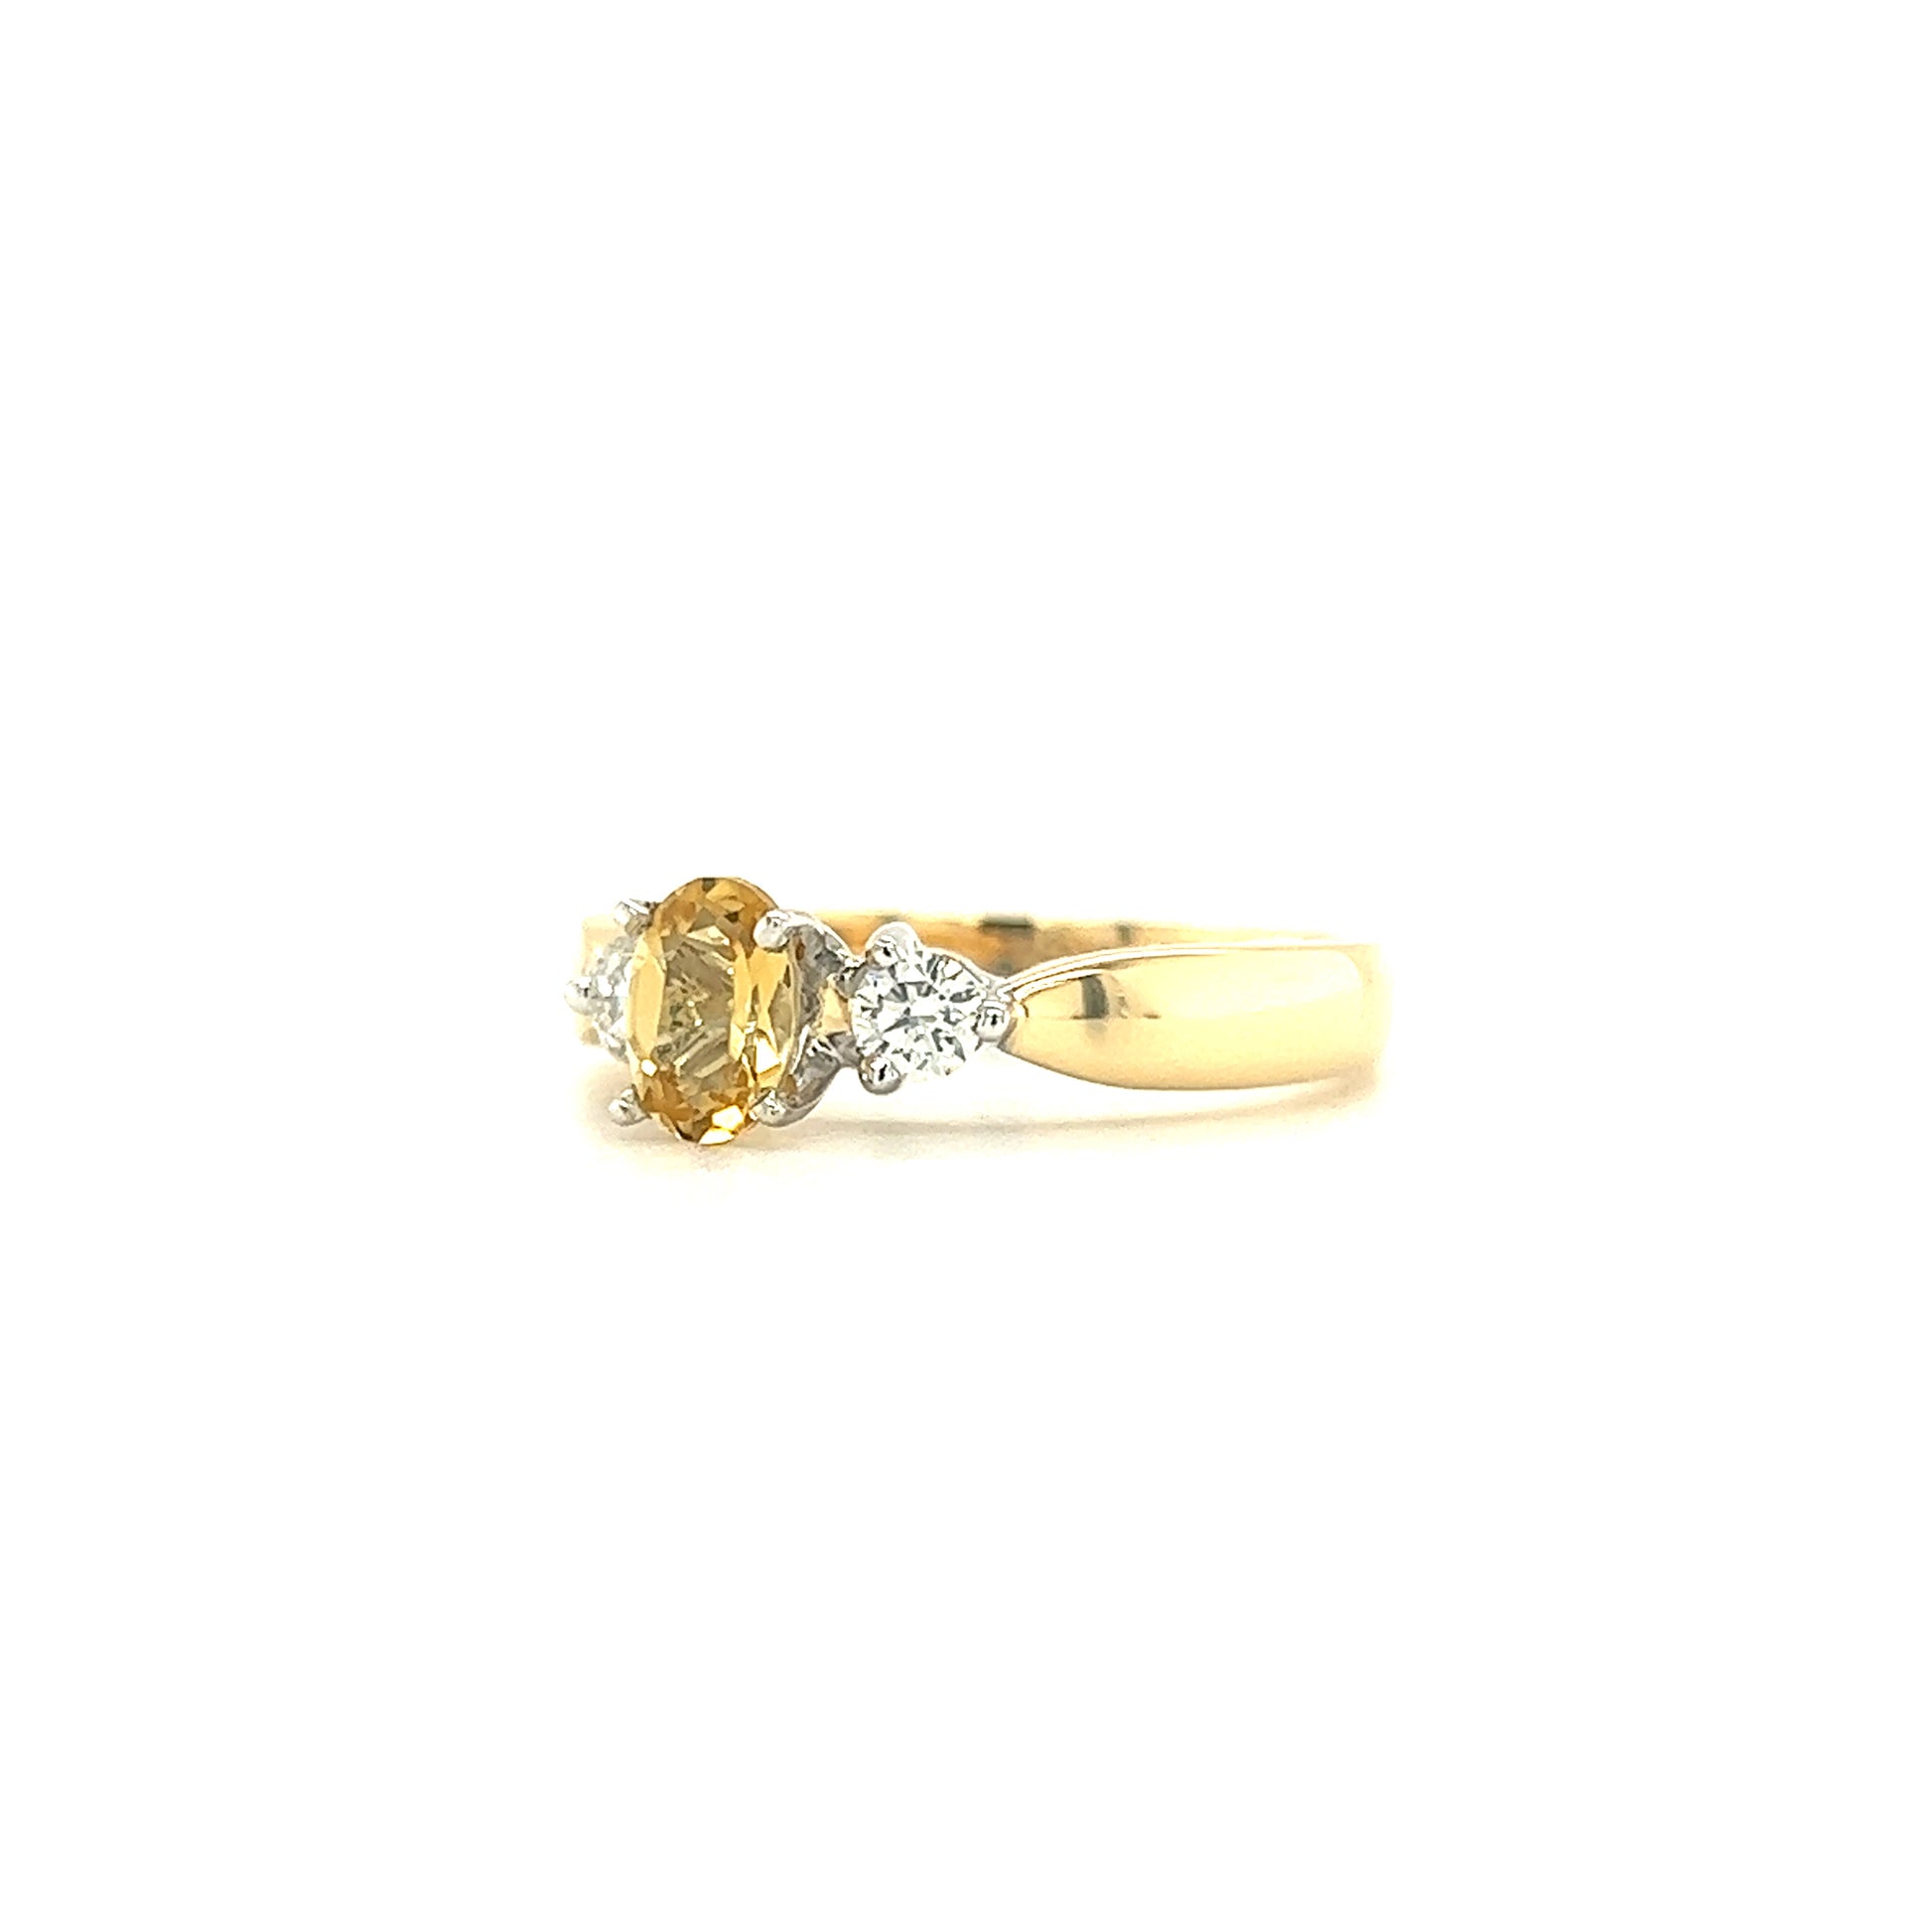 Precious Yellow Topaz Ring with Two Side Diamonds in 14K Yellow Gold Right Side View